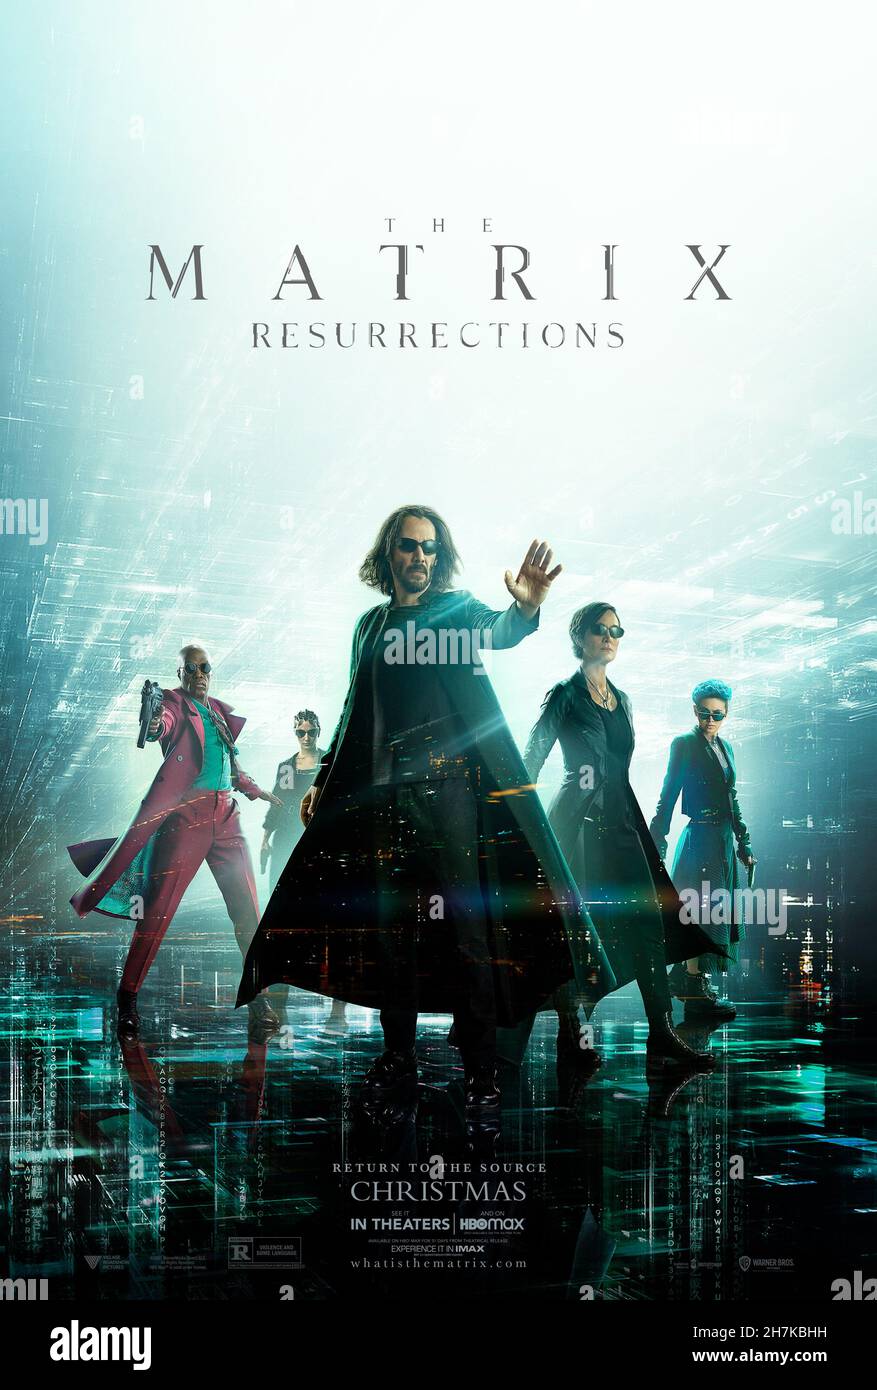 RELEASE DATE: December 22, 2021 TITLE: The Matrix Resurrections STUDIO: Village Roadshow Pictures DIRECTOR: Lana Wachowski PLOT: Unknown STARRING: KEANU REEVES as Neo poster art. (Credit Image: © Village Roadshow Pictures/Entertainment Pictures Stock Photo